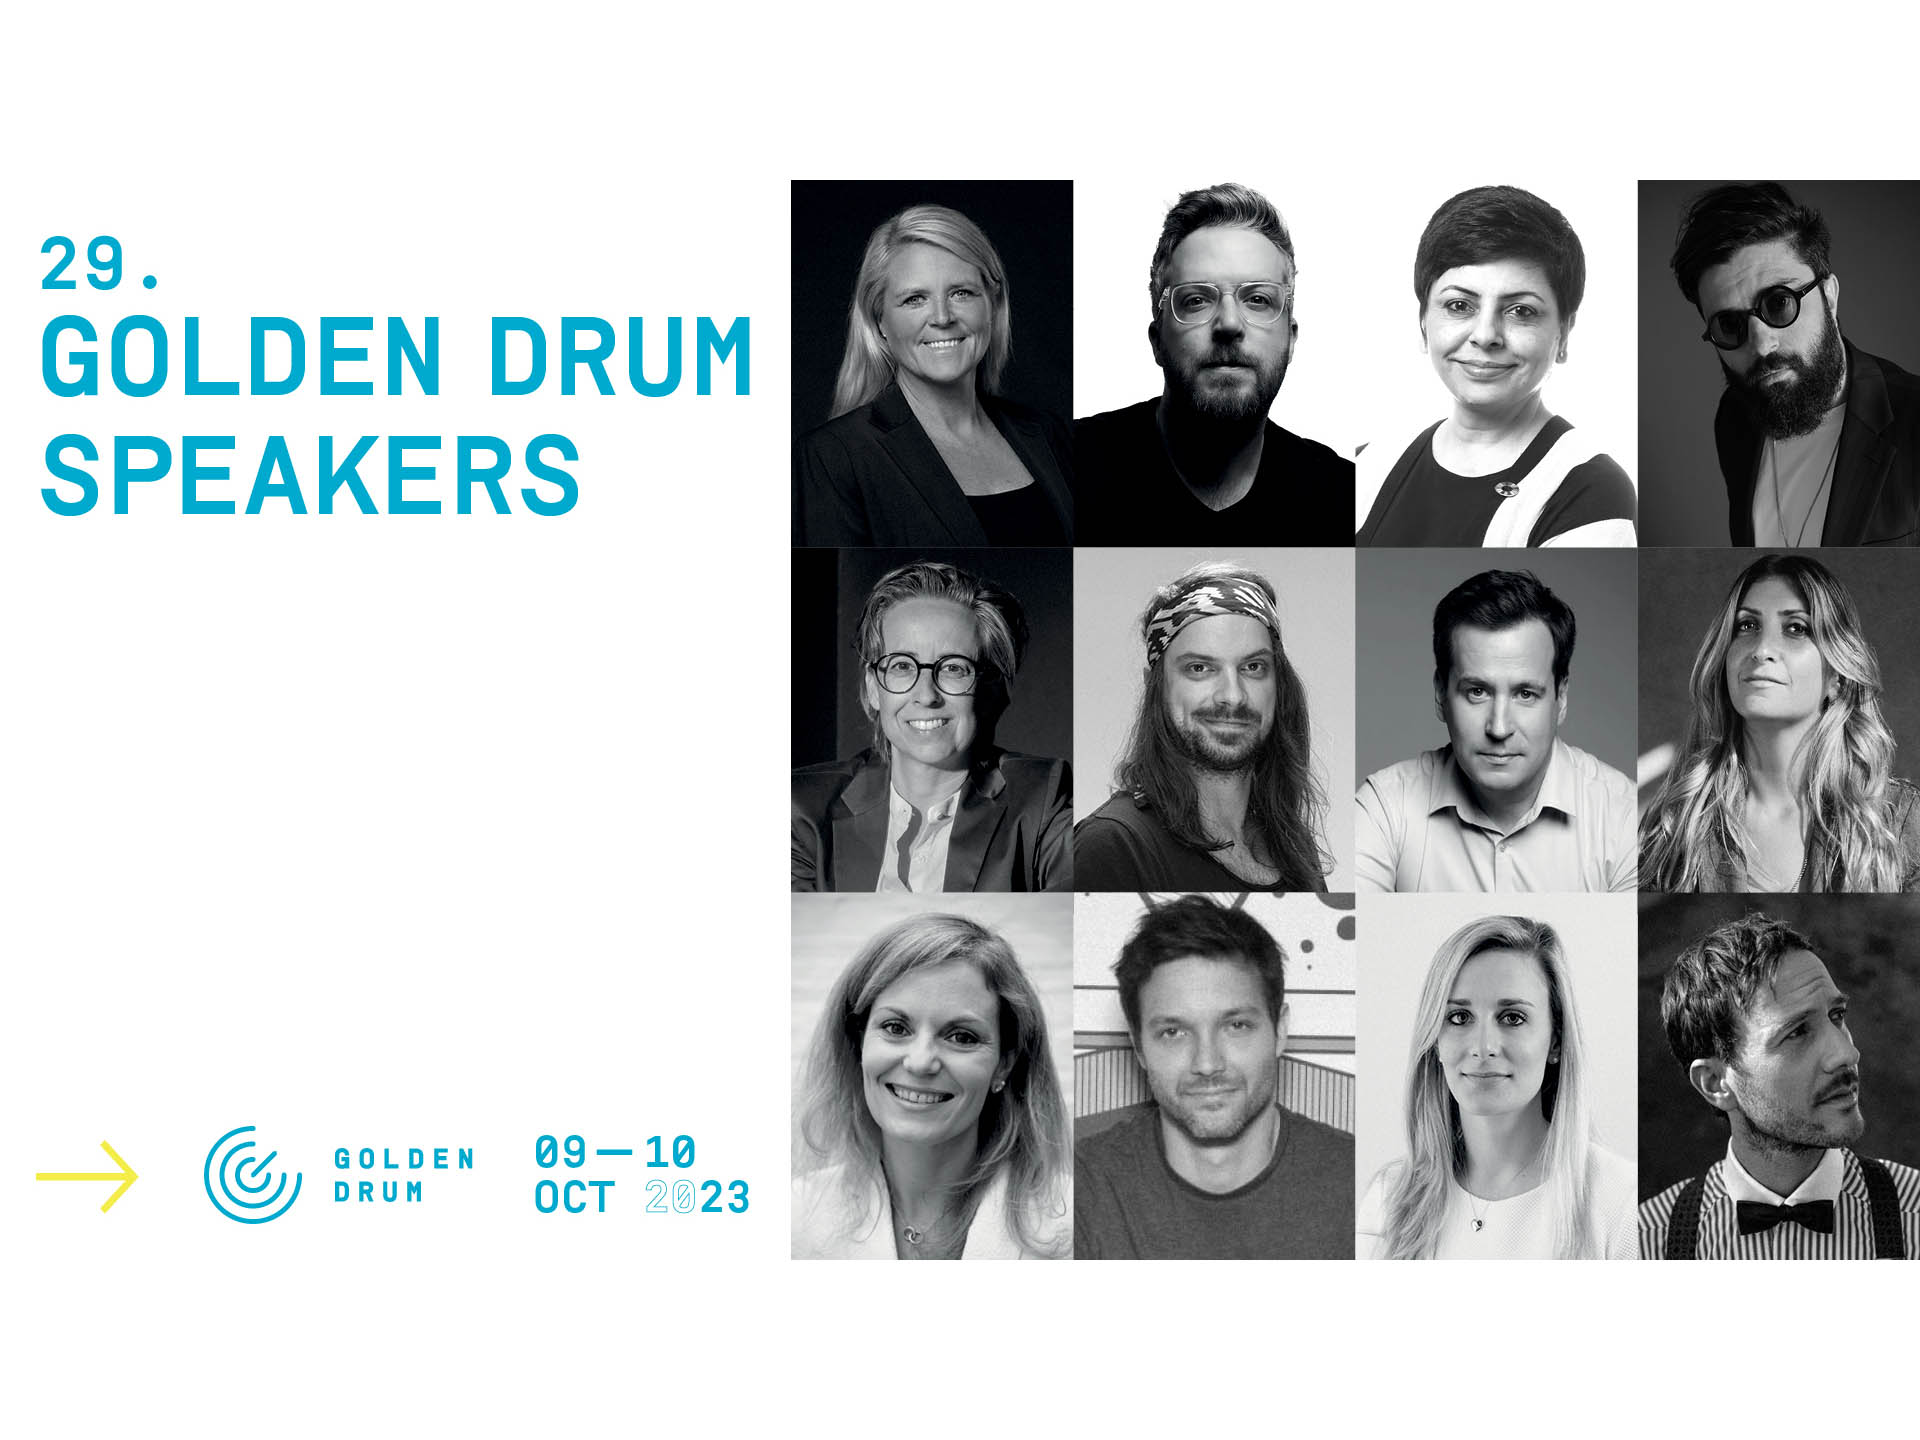 Golden Drum Festival announces preliminary program and first speakers